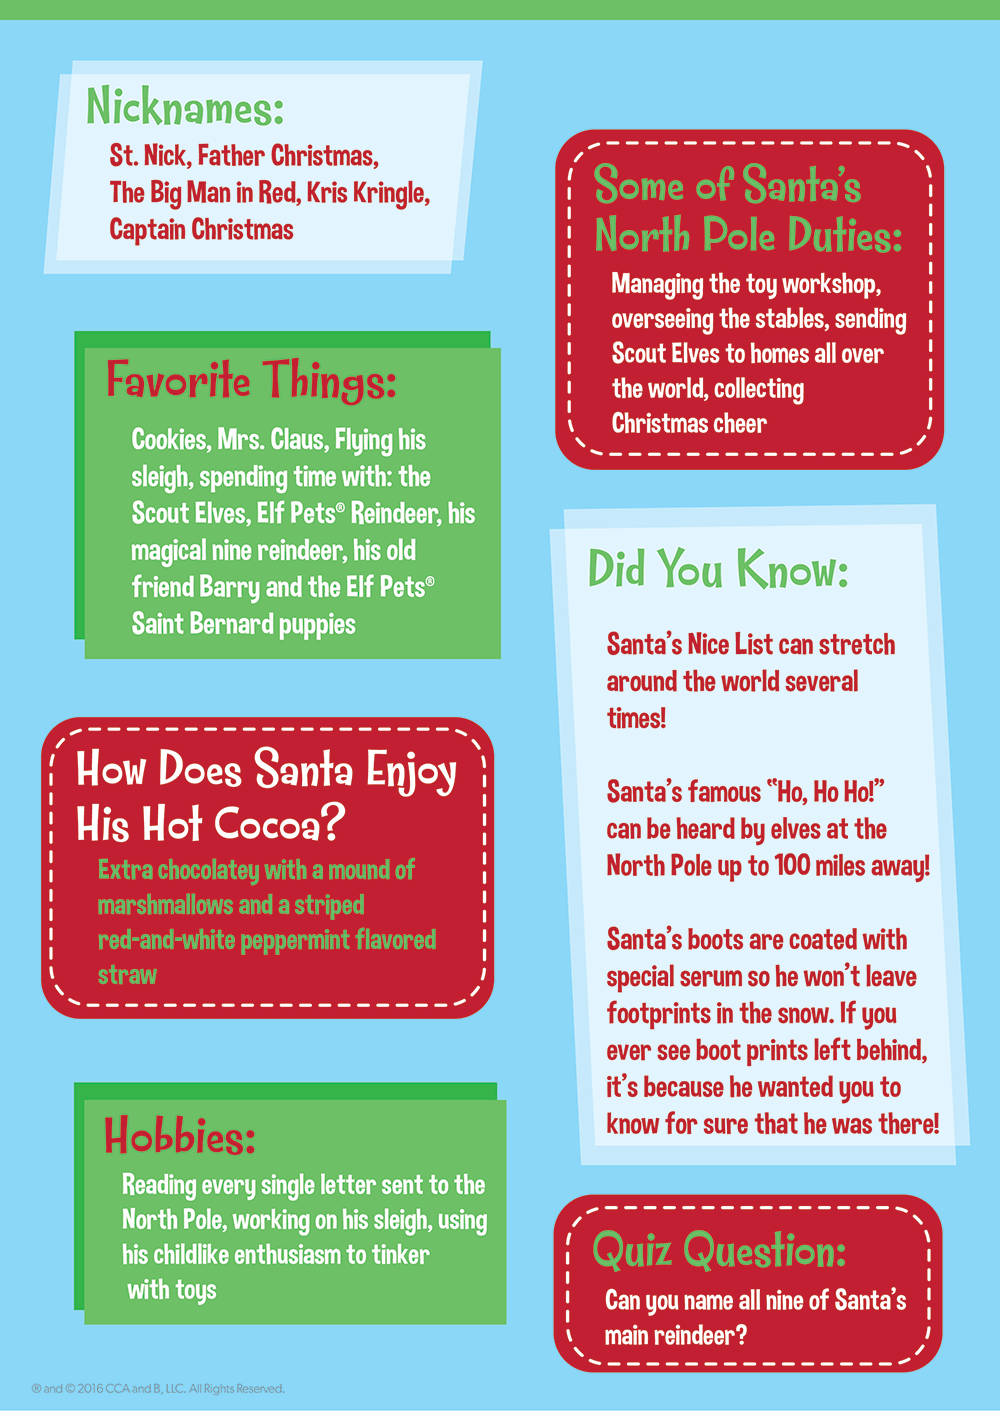 Fun Facts about Santa  – The Elf on the Shelf 